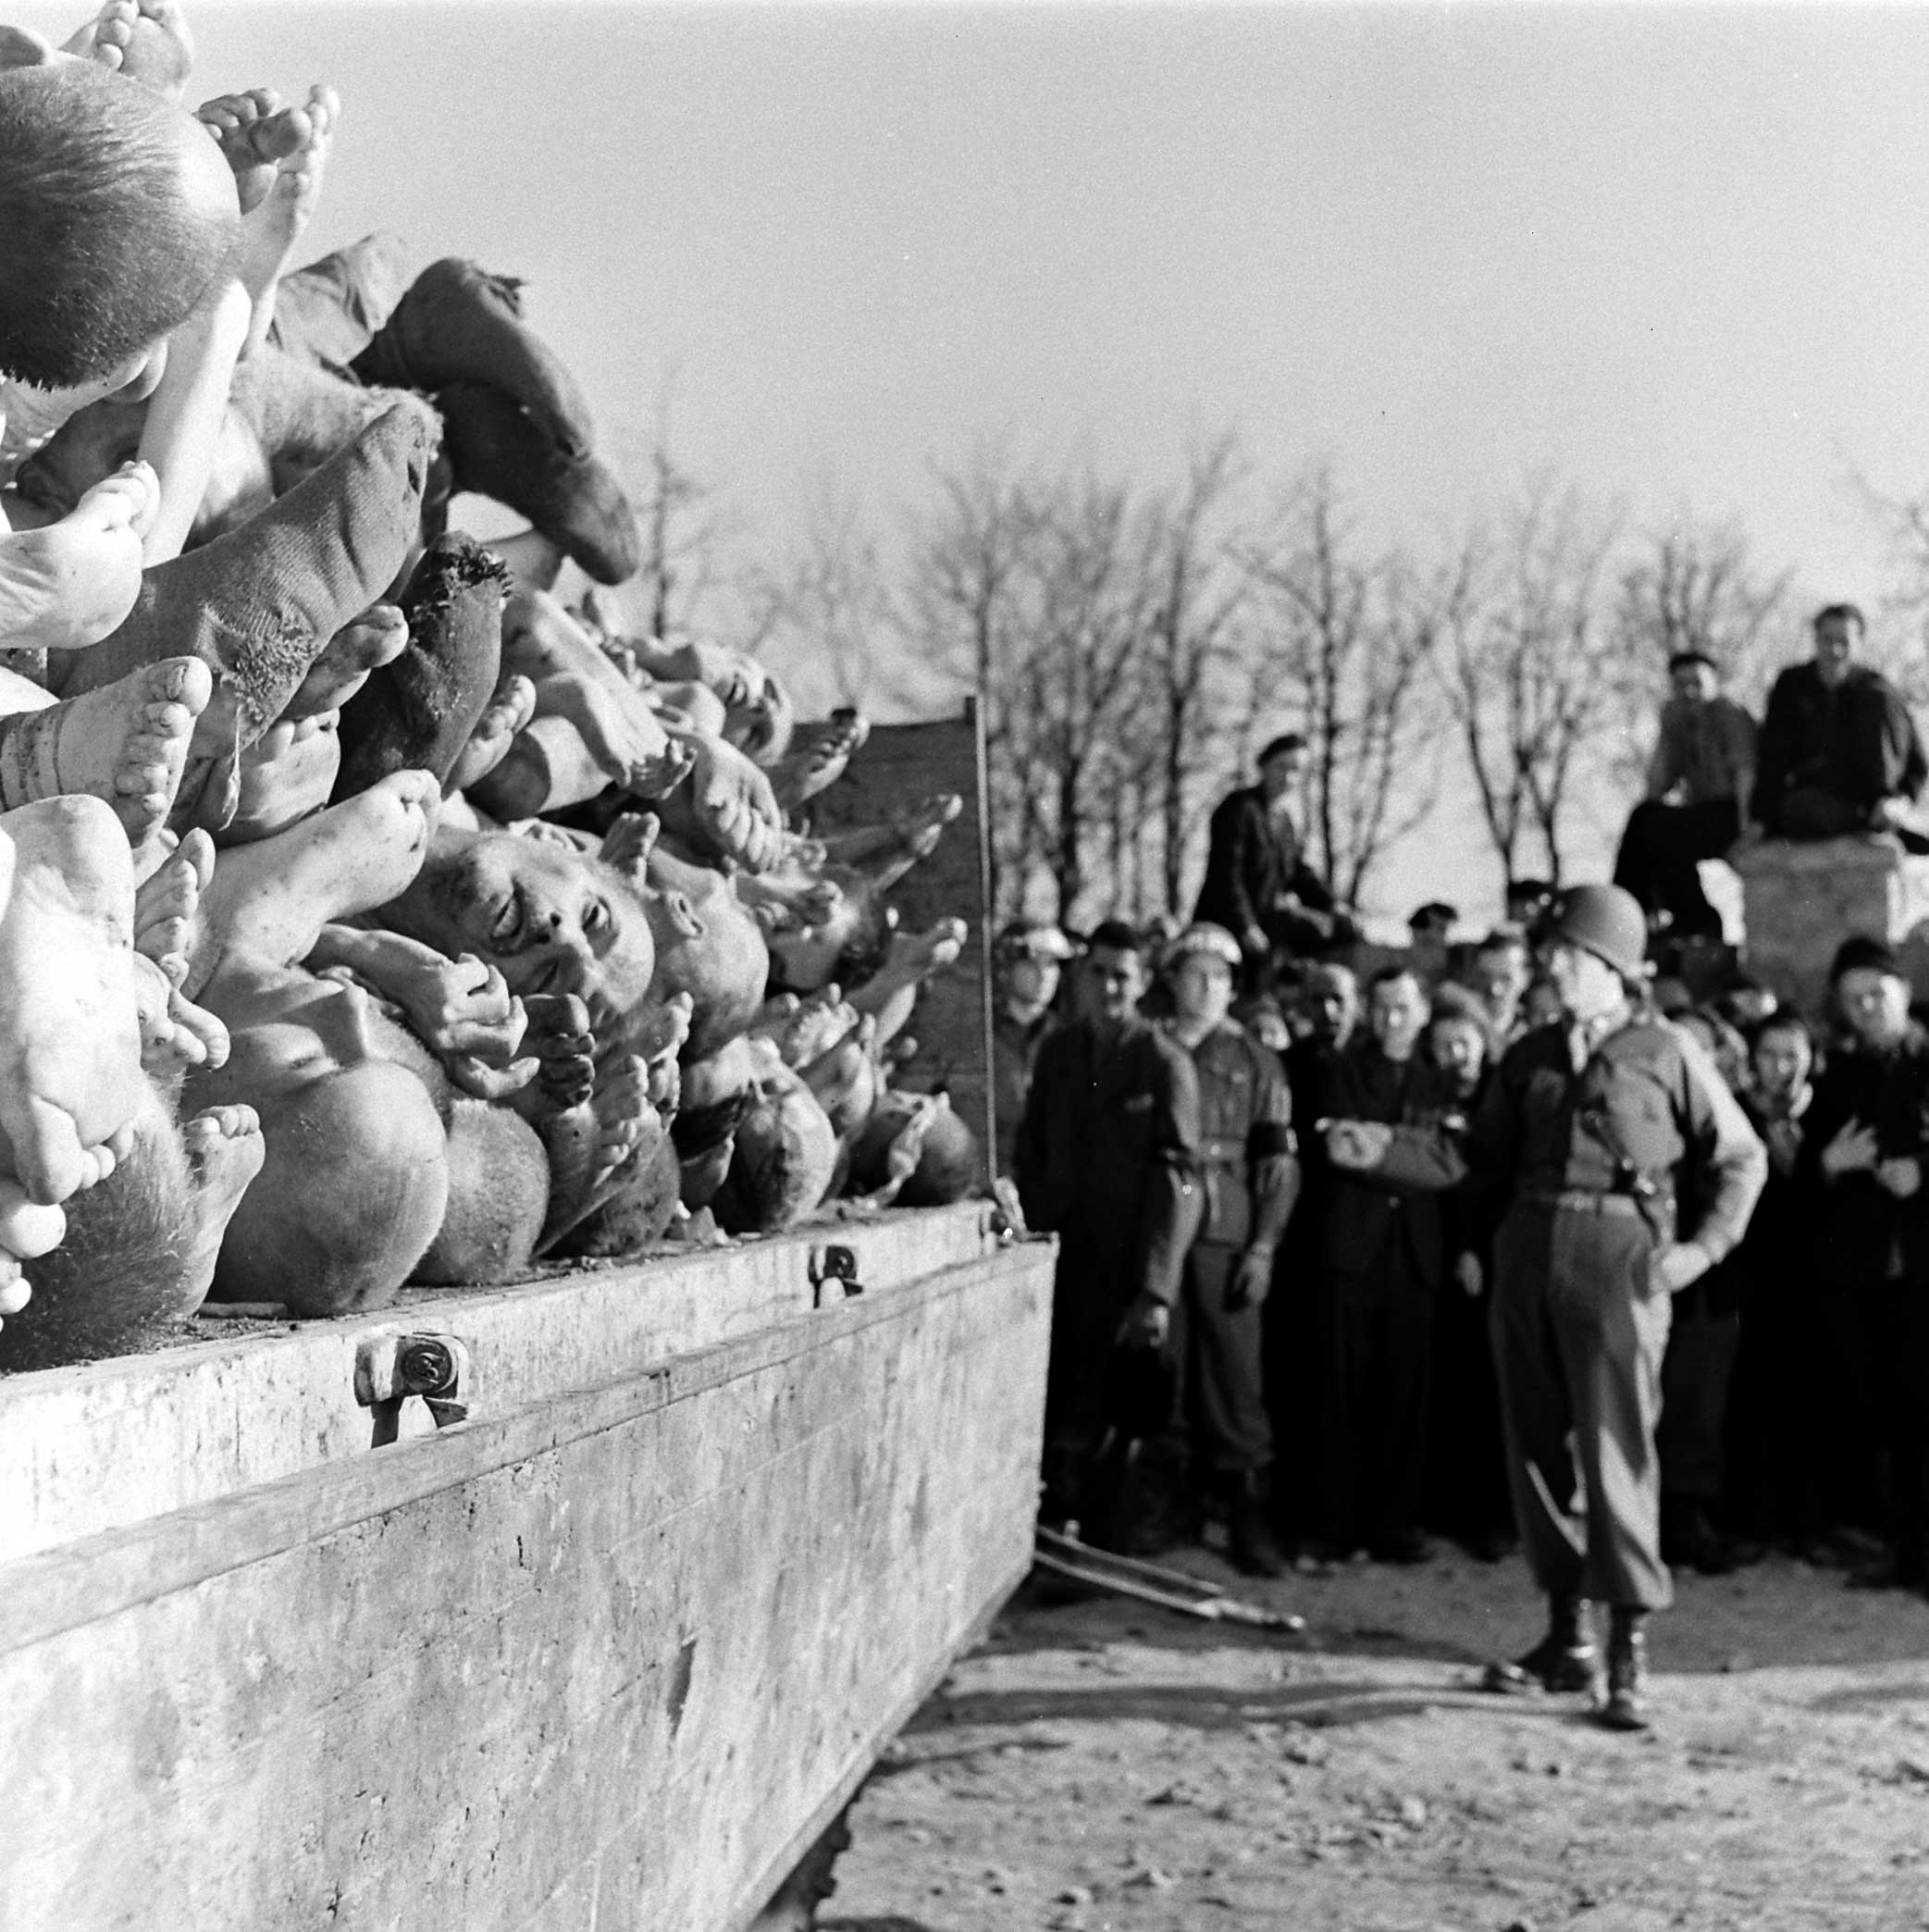 Behind the Picture: The Liberation of Buchenwald, April 1945